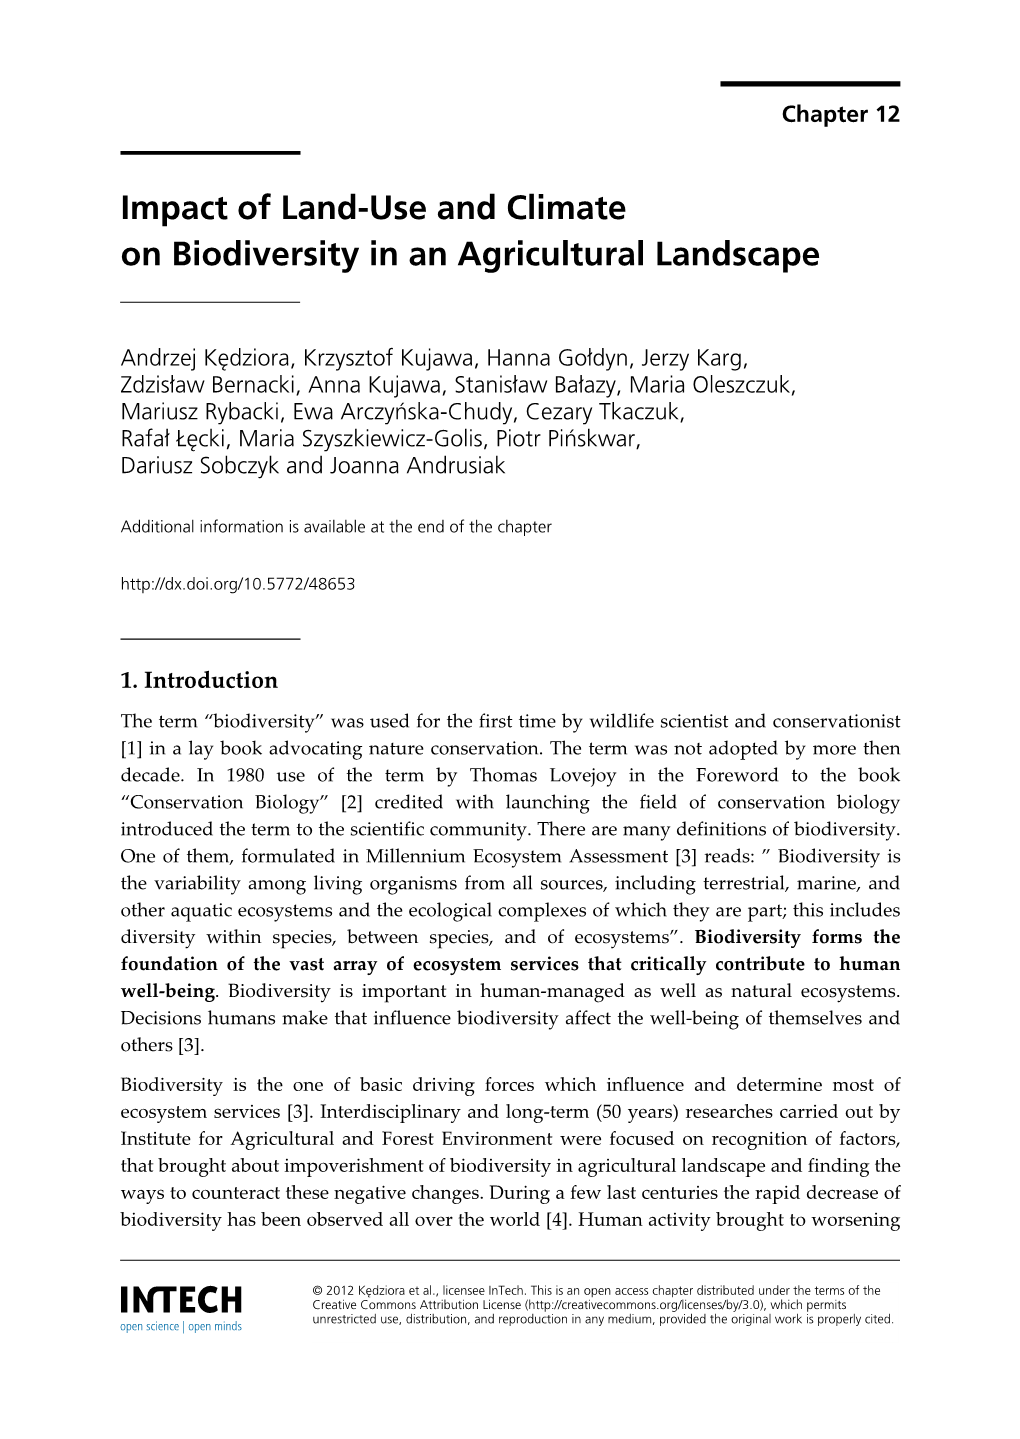 Impact of Land-Use and Climate on Biodiversity in an Agricultural Landscape